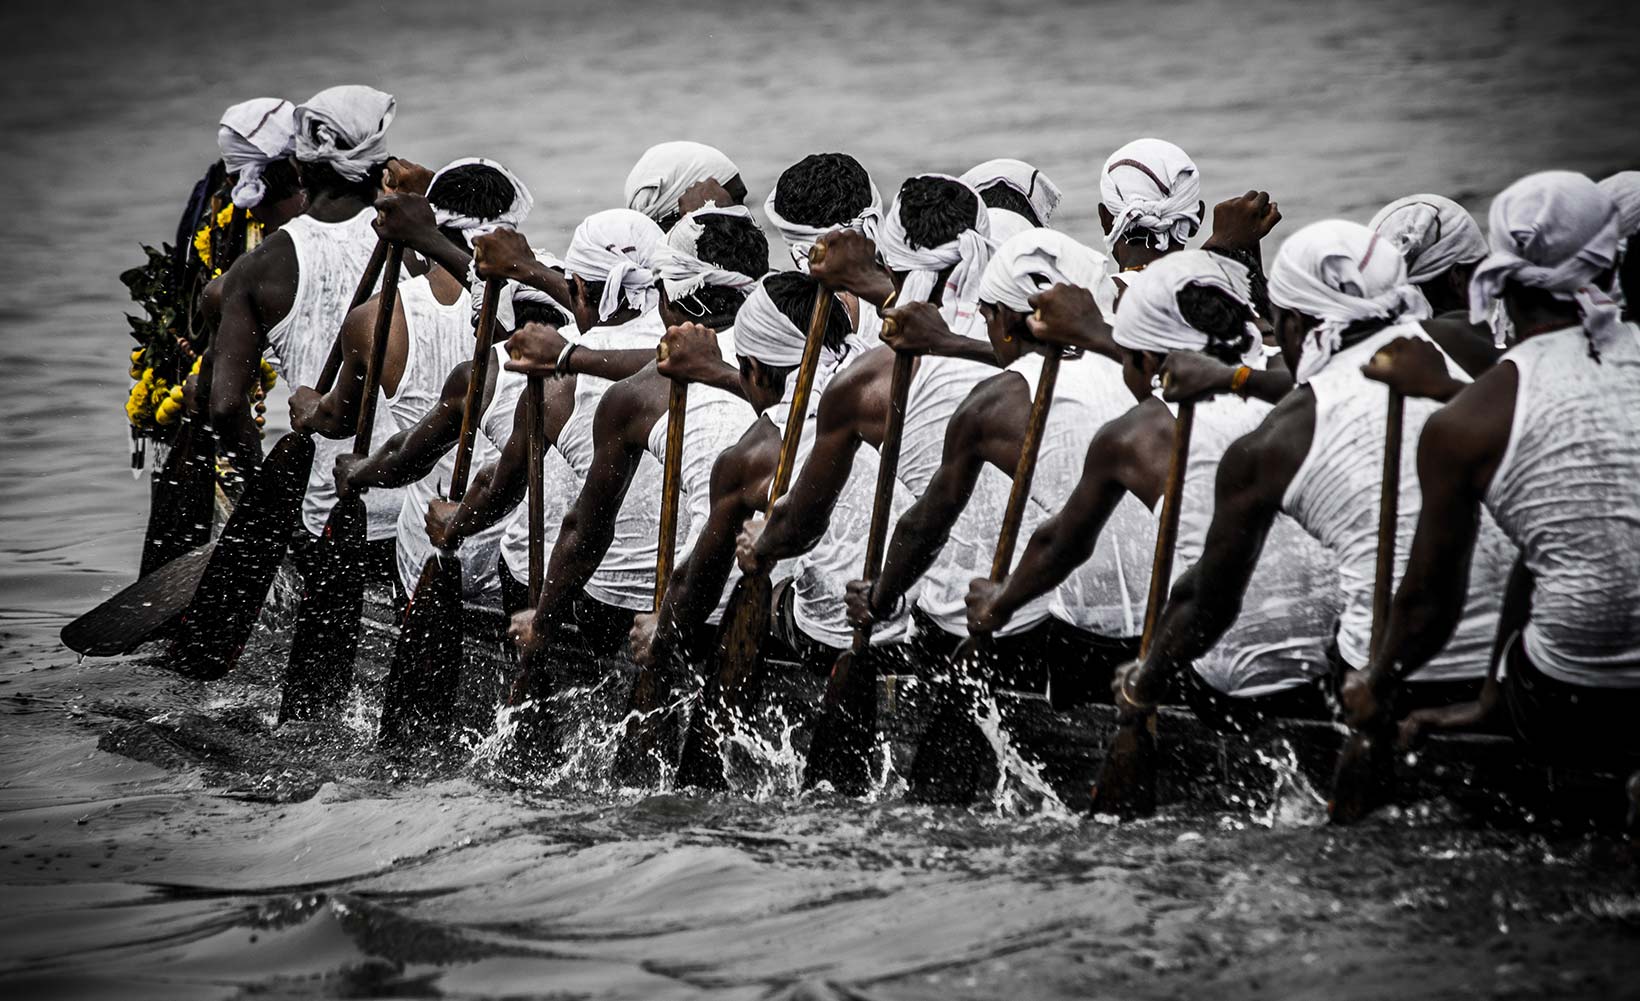 Kerala’s Own Water Olympics : The Boat Races